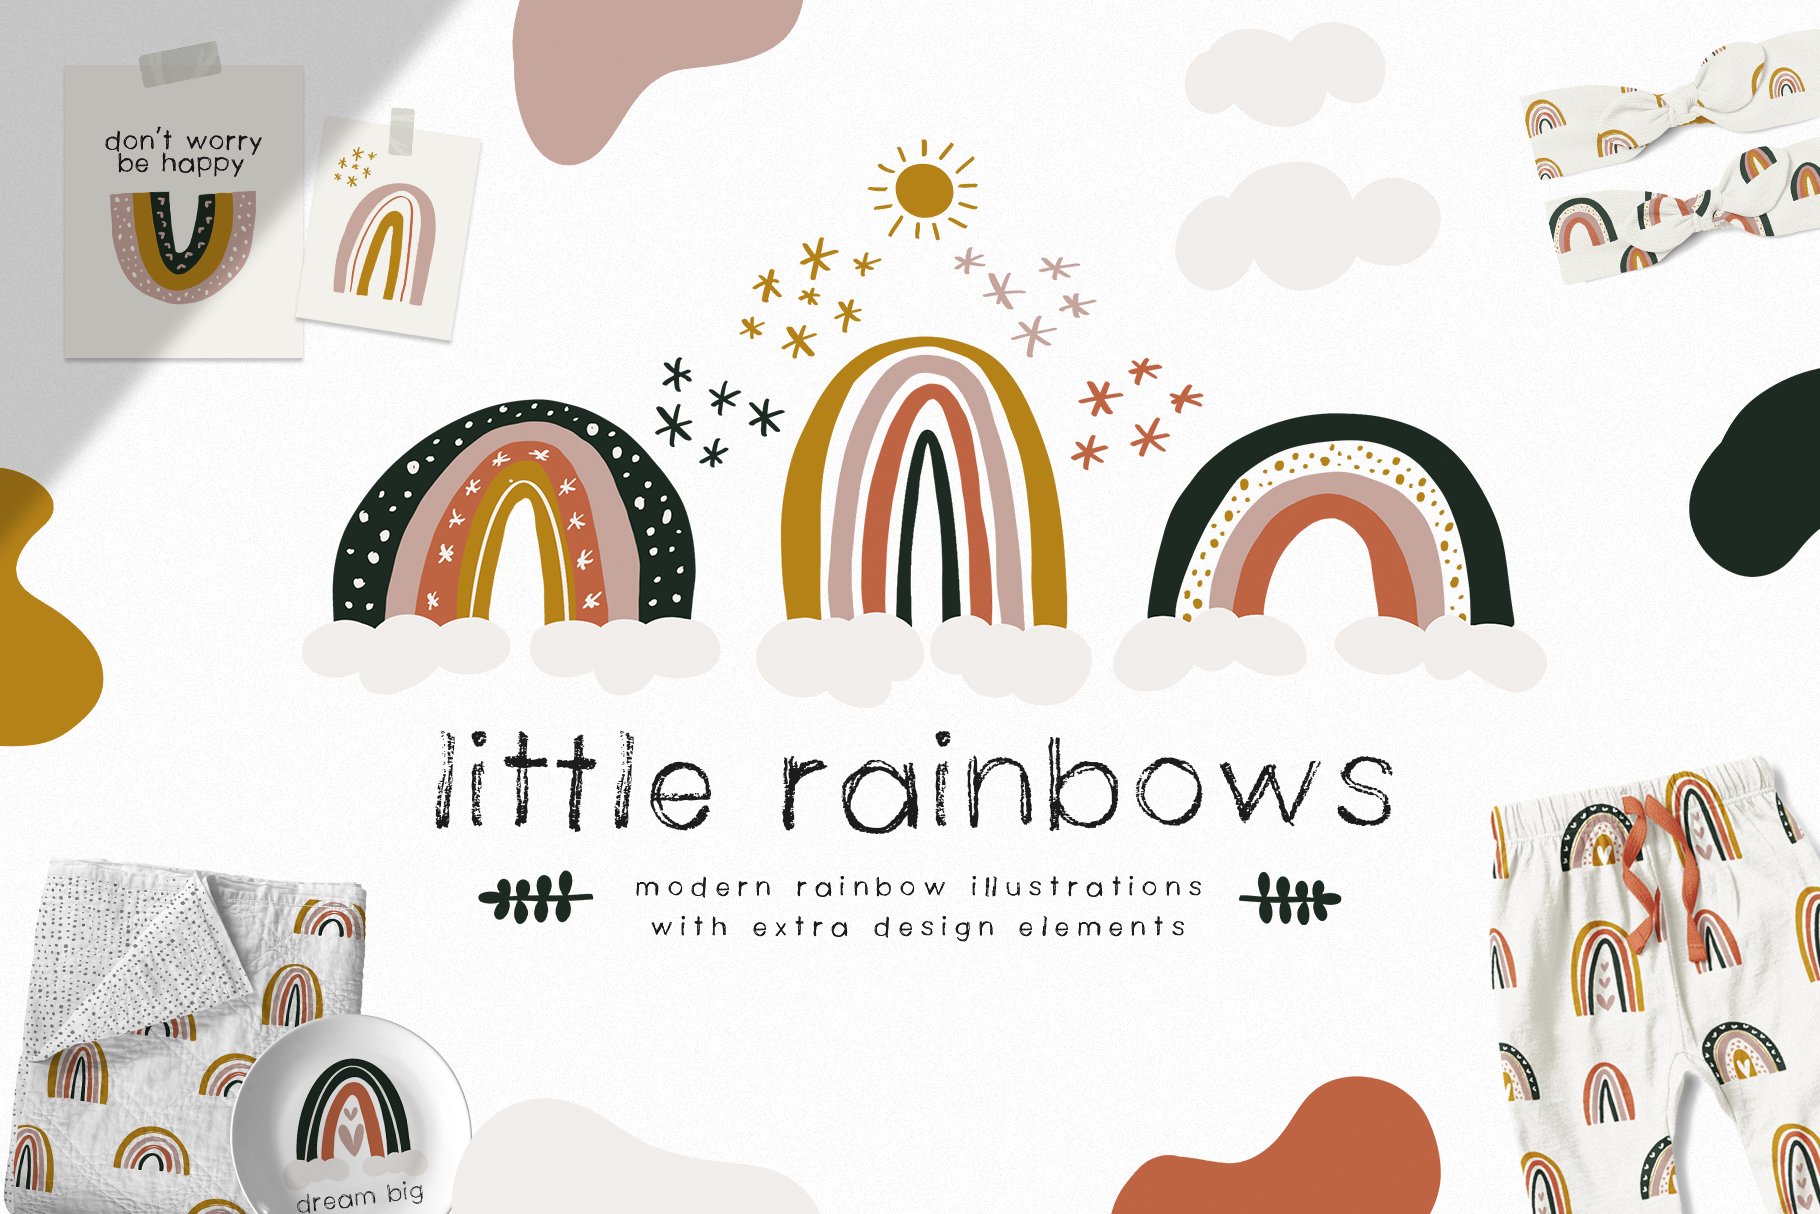 Little Rainbows - Illustrations cover image.